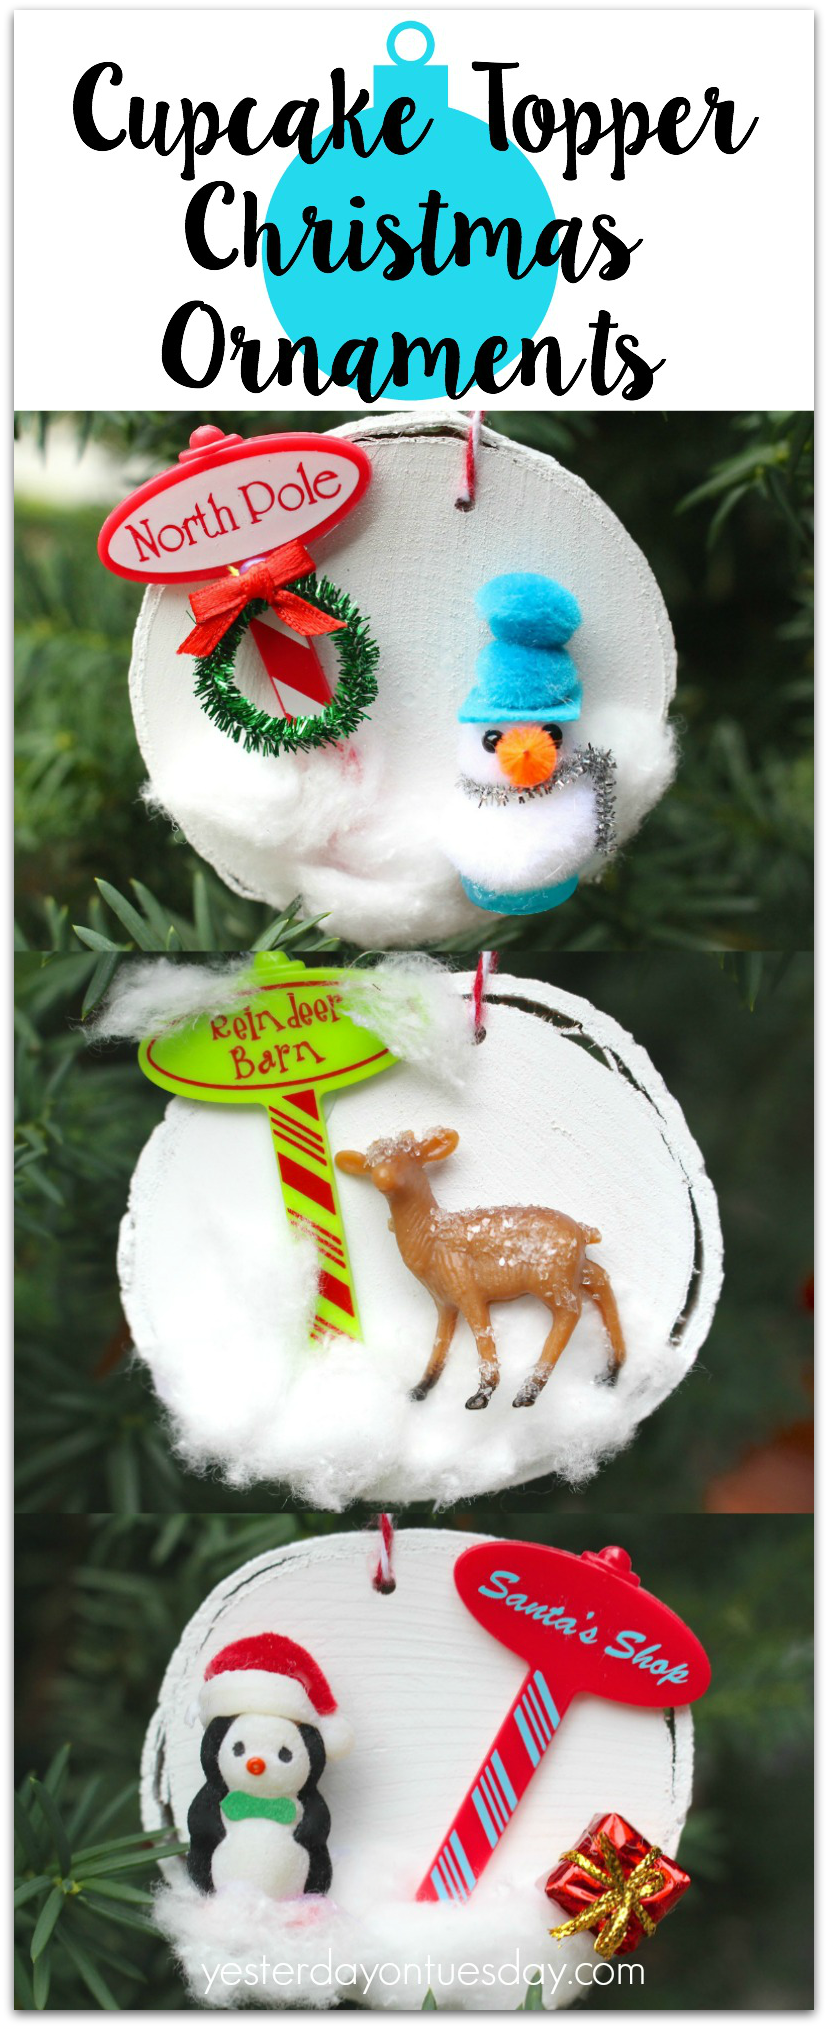 Cupcake Topper Christmas Ornaments